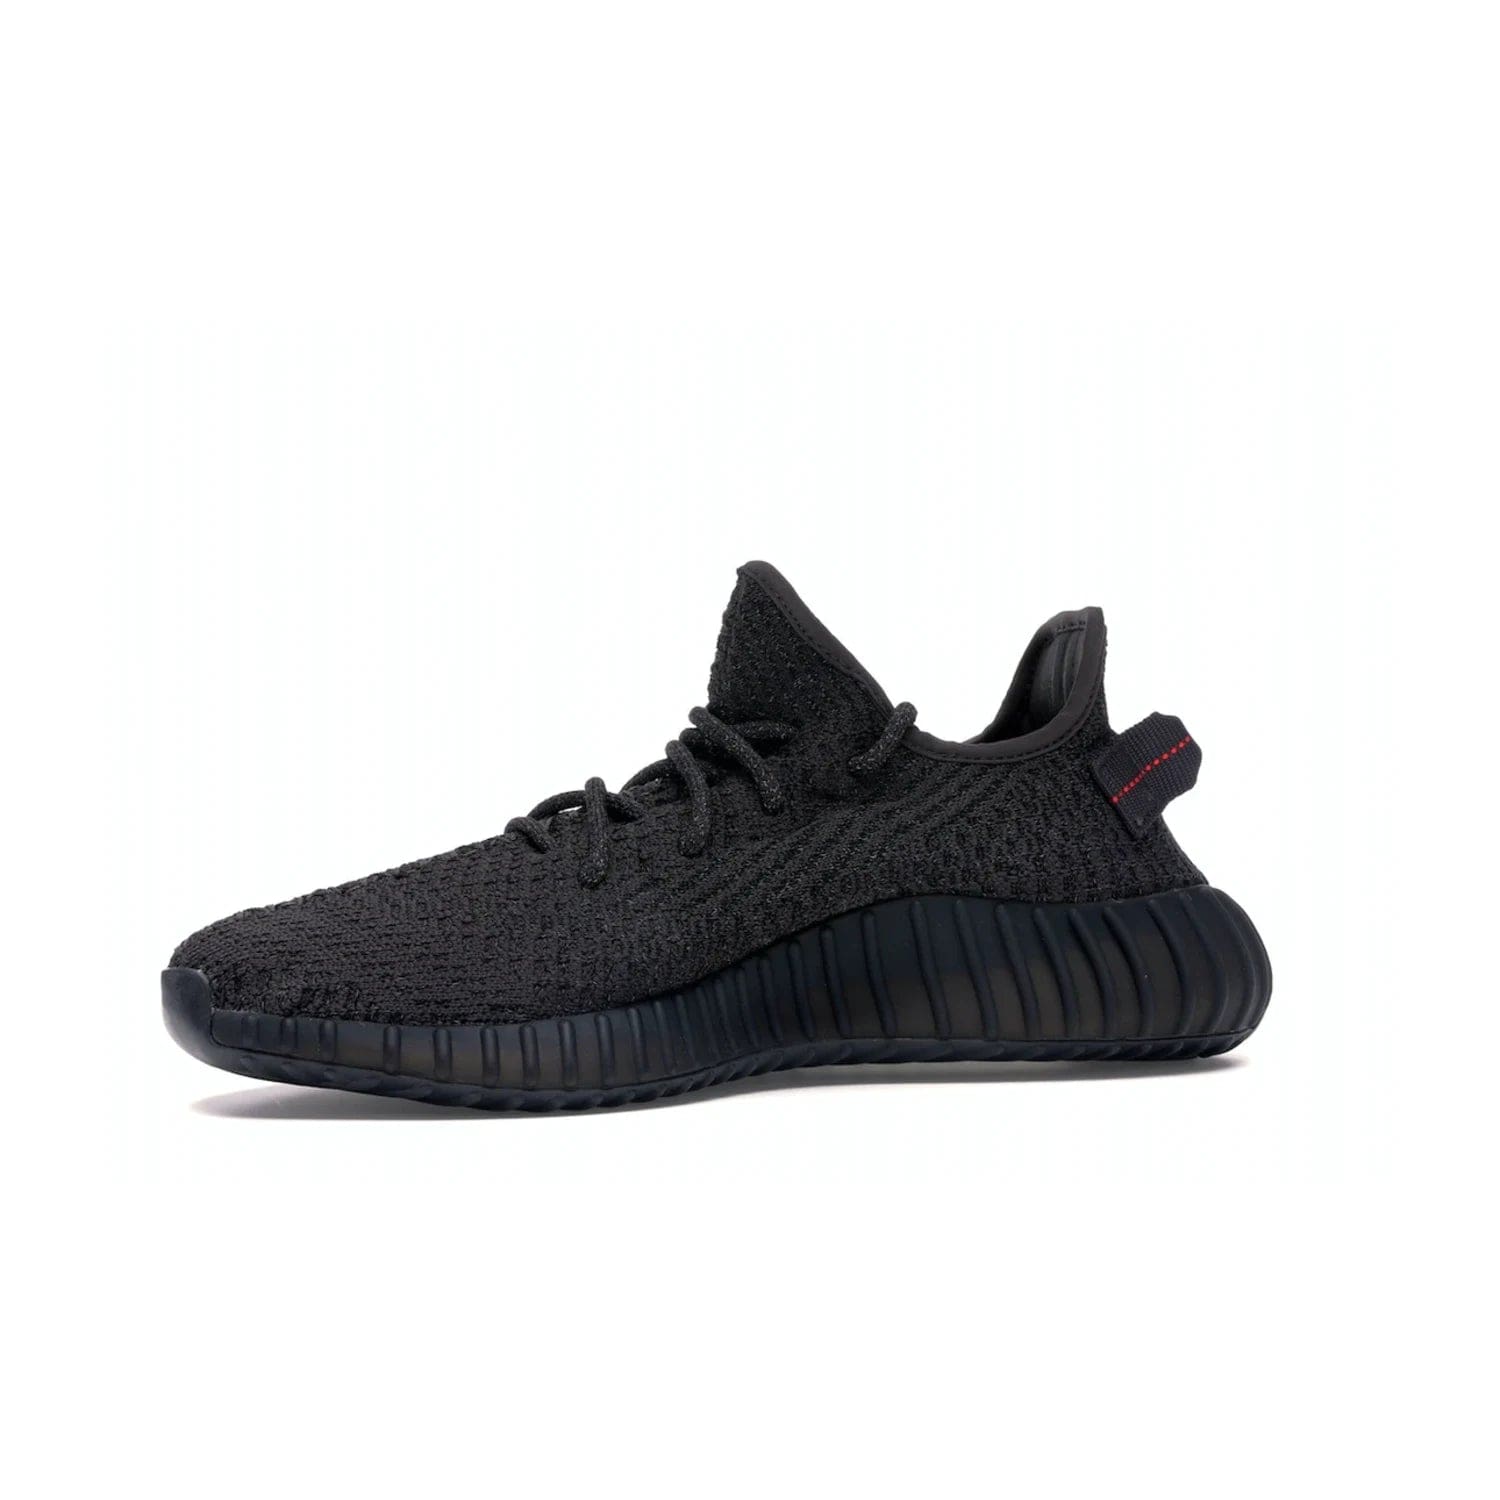 adidas Yeezy Boost 350 V2 Static Black (Reflective) - Image 17 - Only at www.BallersClubKickz.com - Make a statement with the adidas Yeezy Boost 350 V2 Static Black Reflective. All-black upper, reflective accents, midsole, and sole combine for a stylish look. High quality materials. June 2019 release. Add to your collection today.